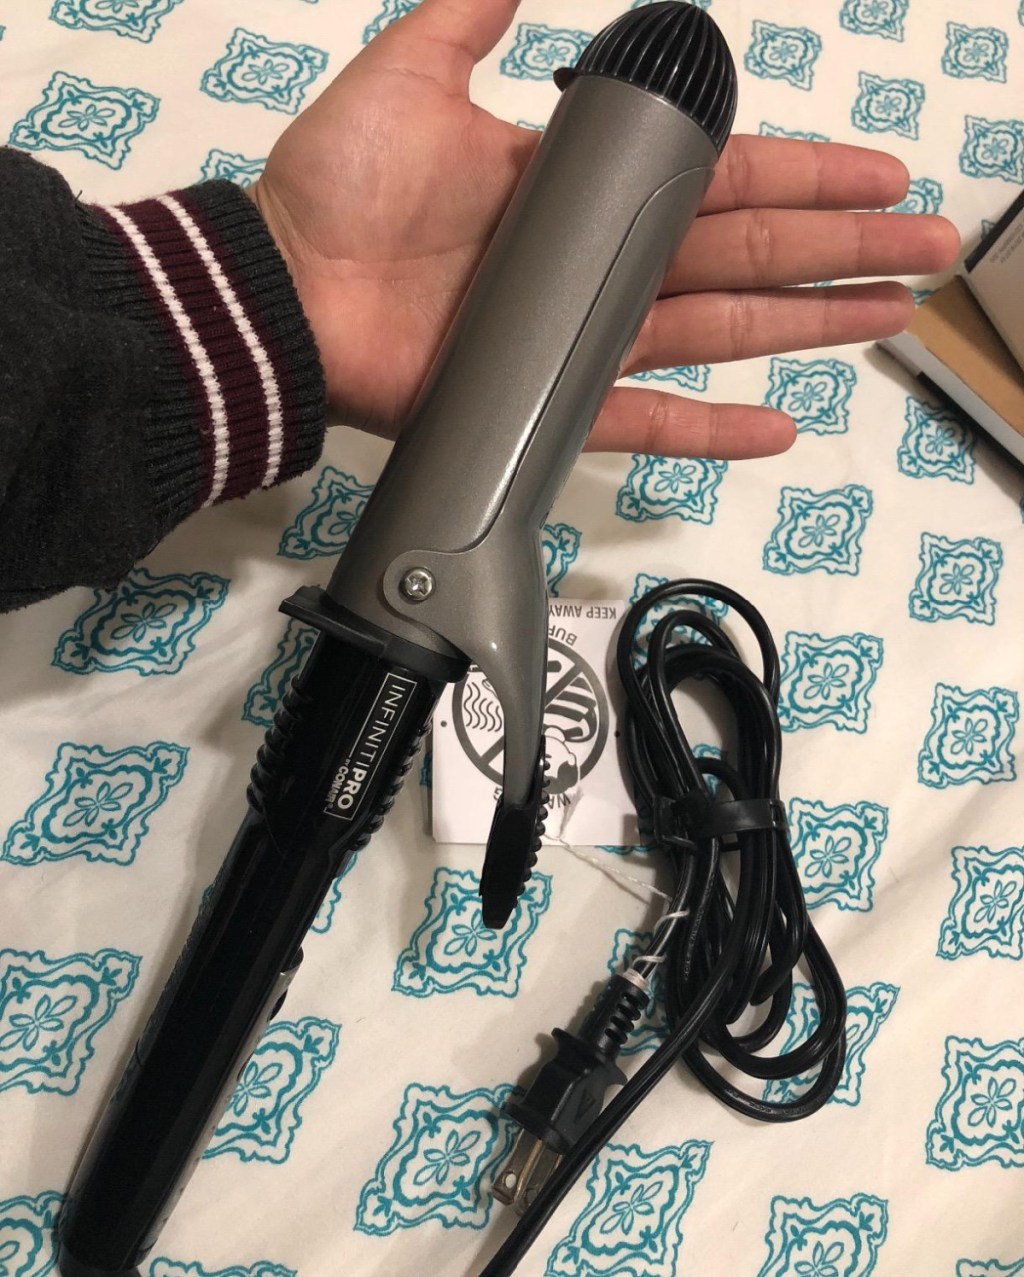 Conair Infinity Pro curling iron - best curling irons